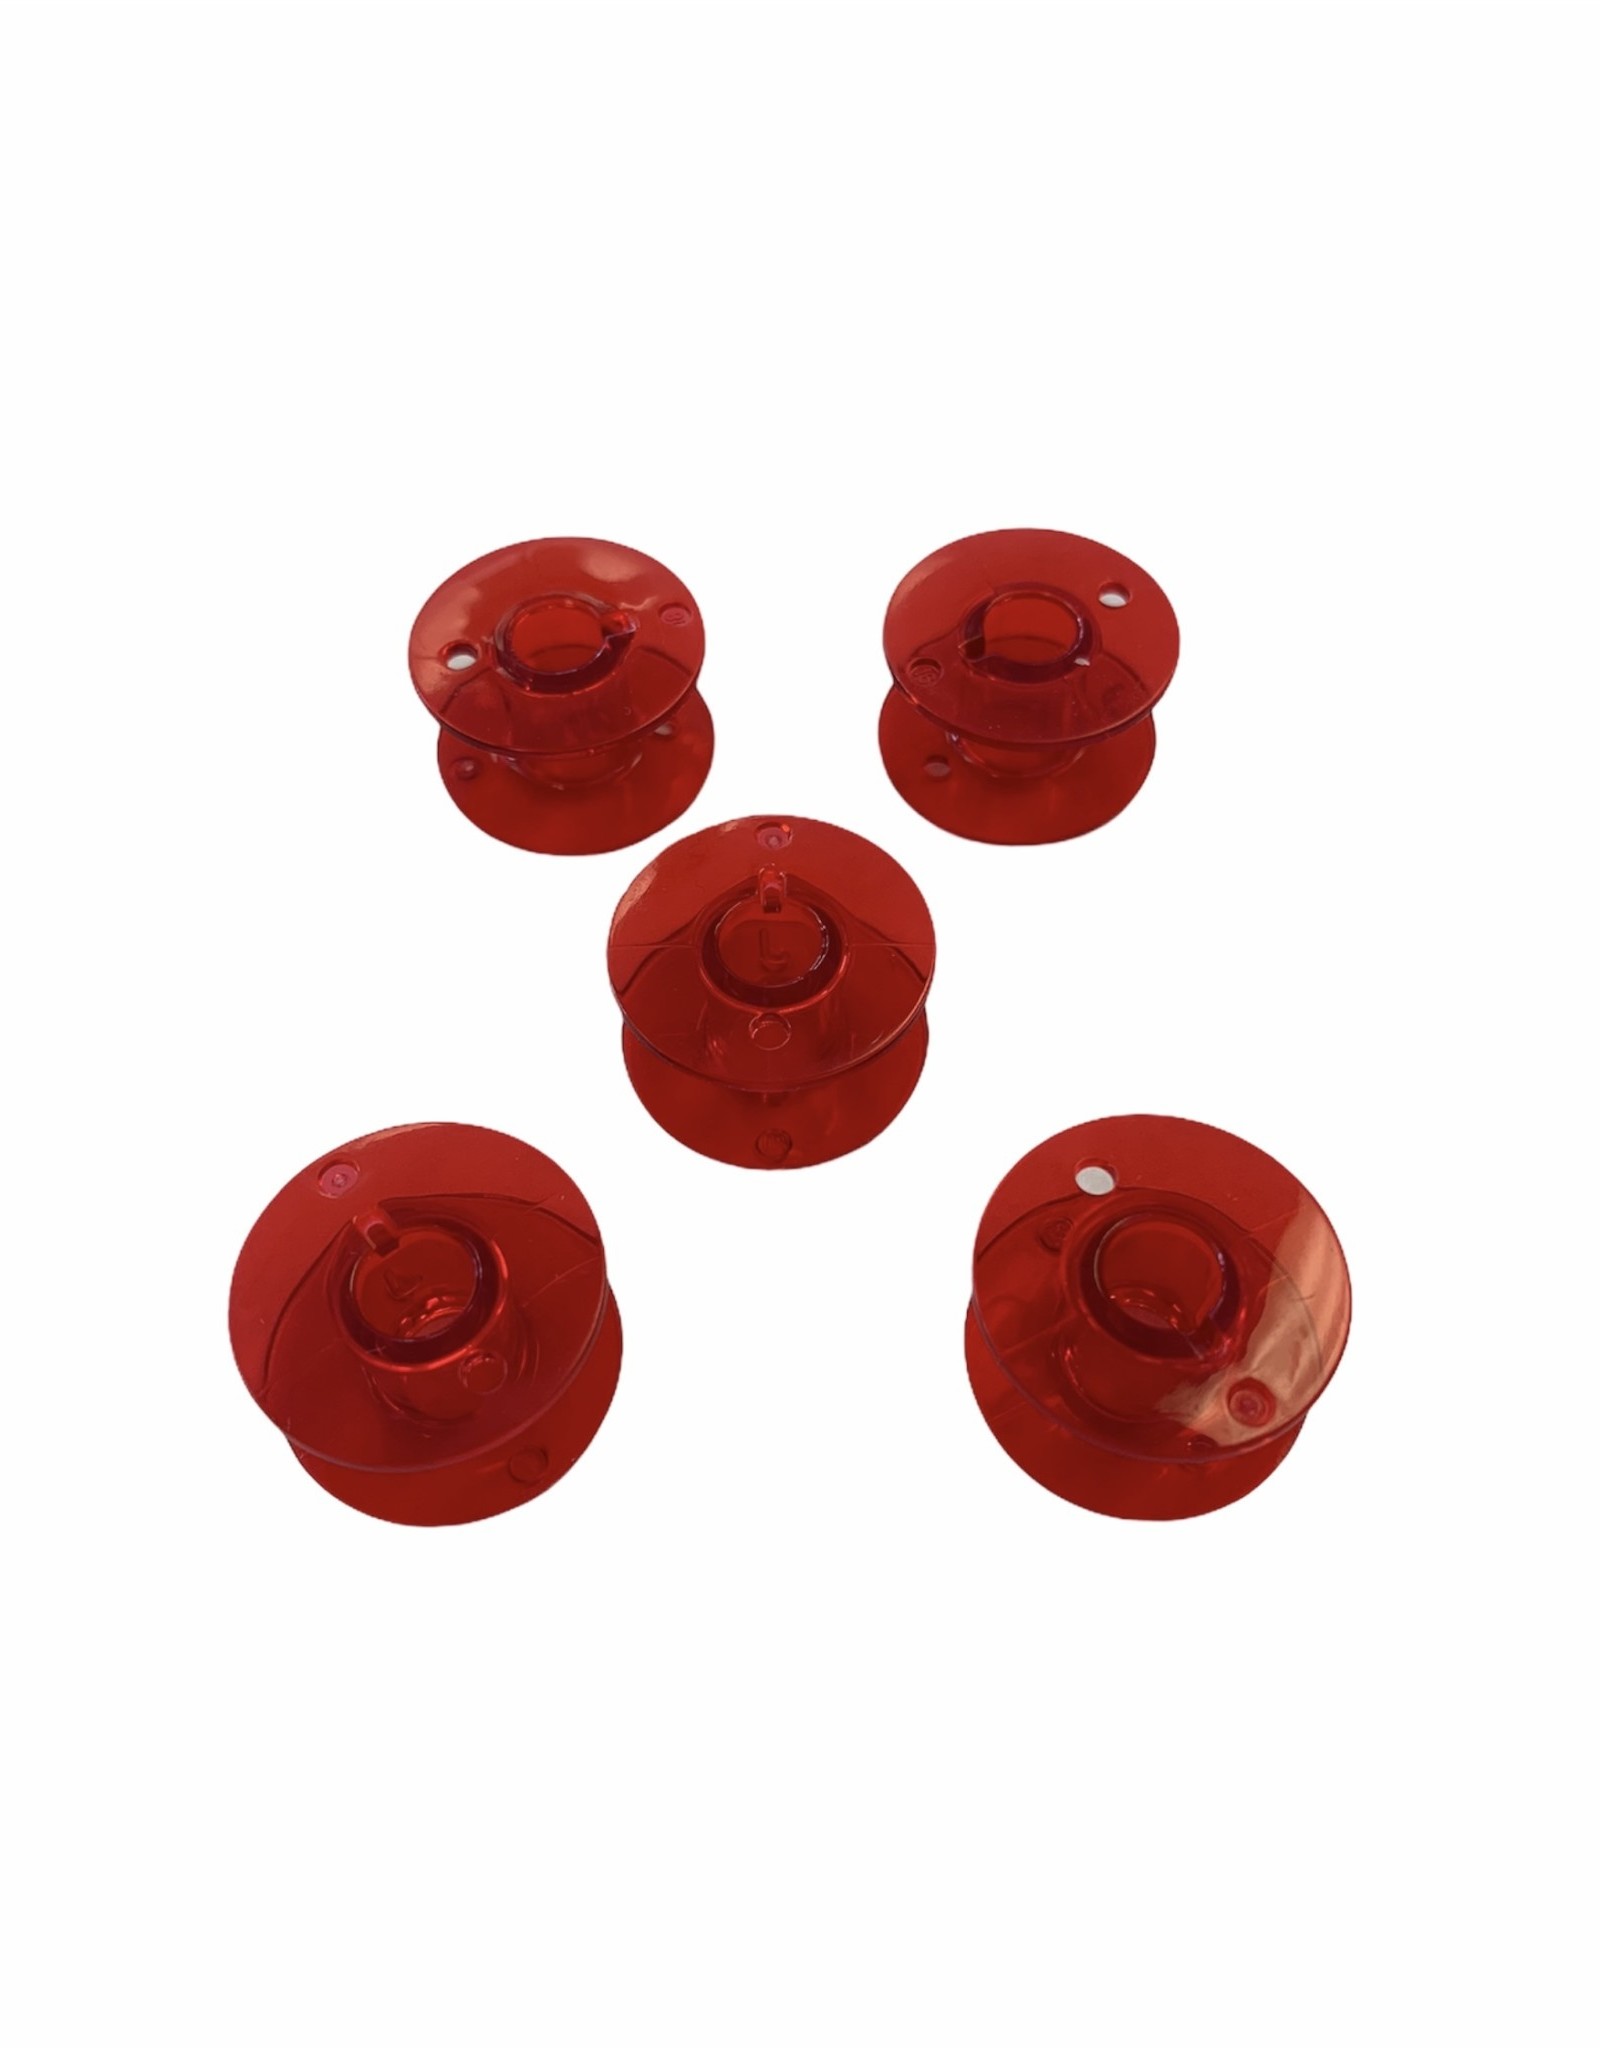 Janome Bobbins Red (5 pack)